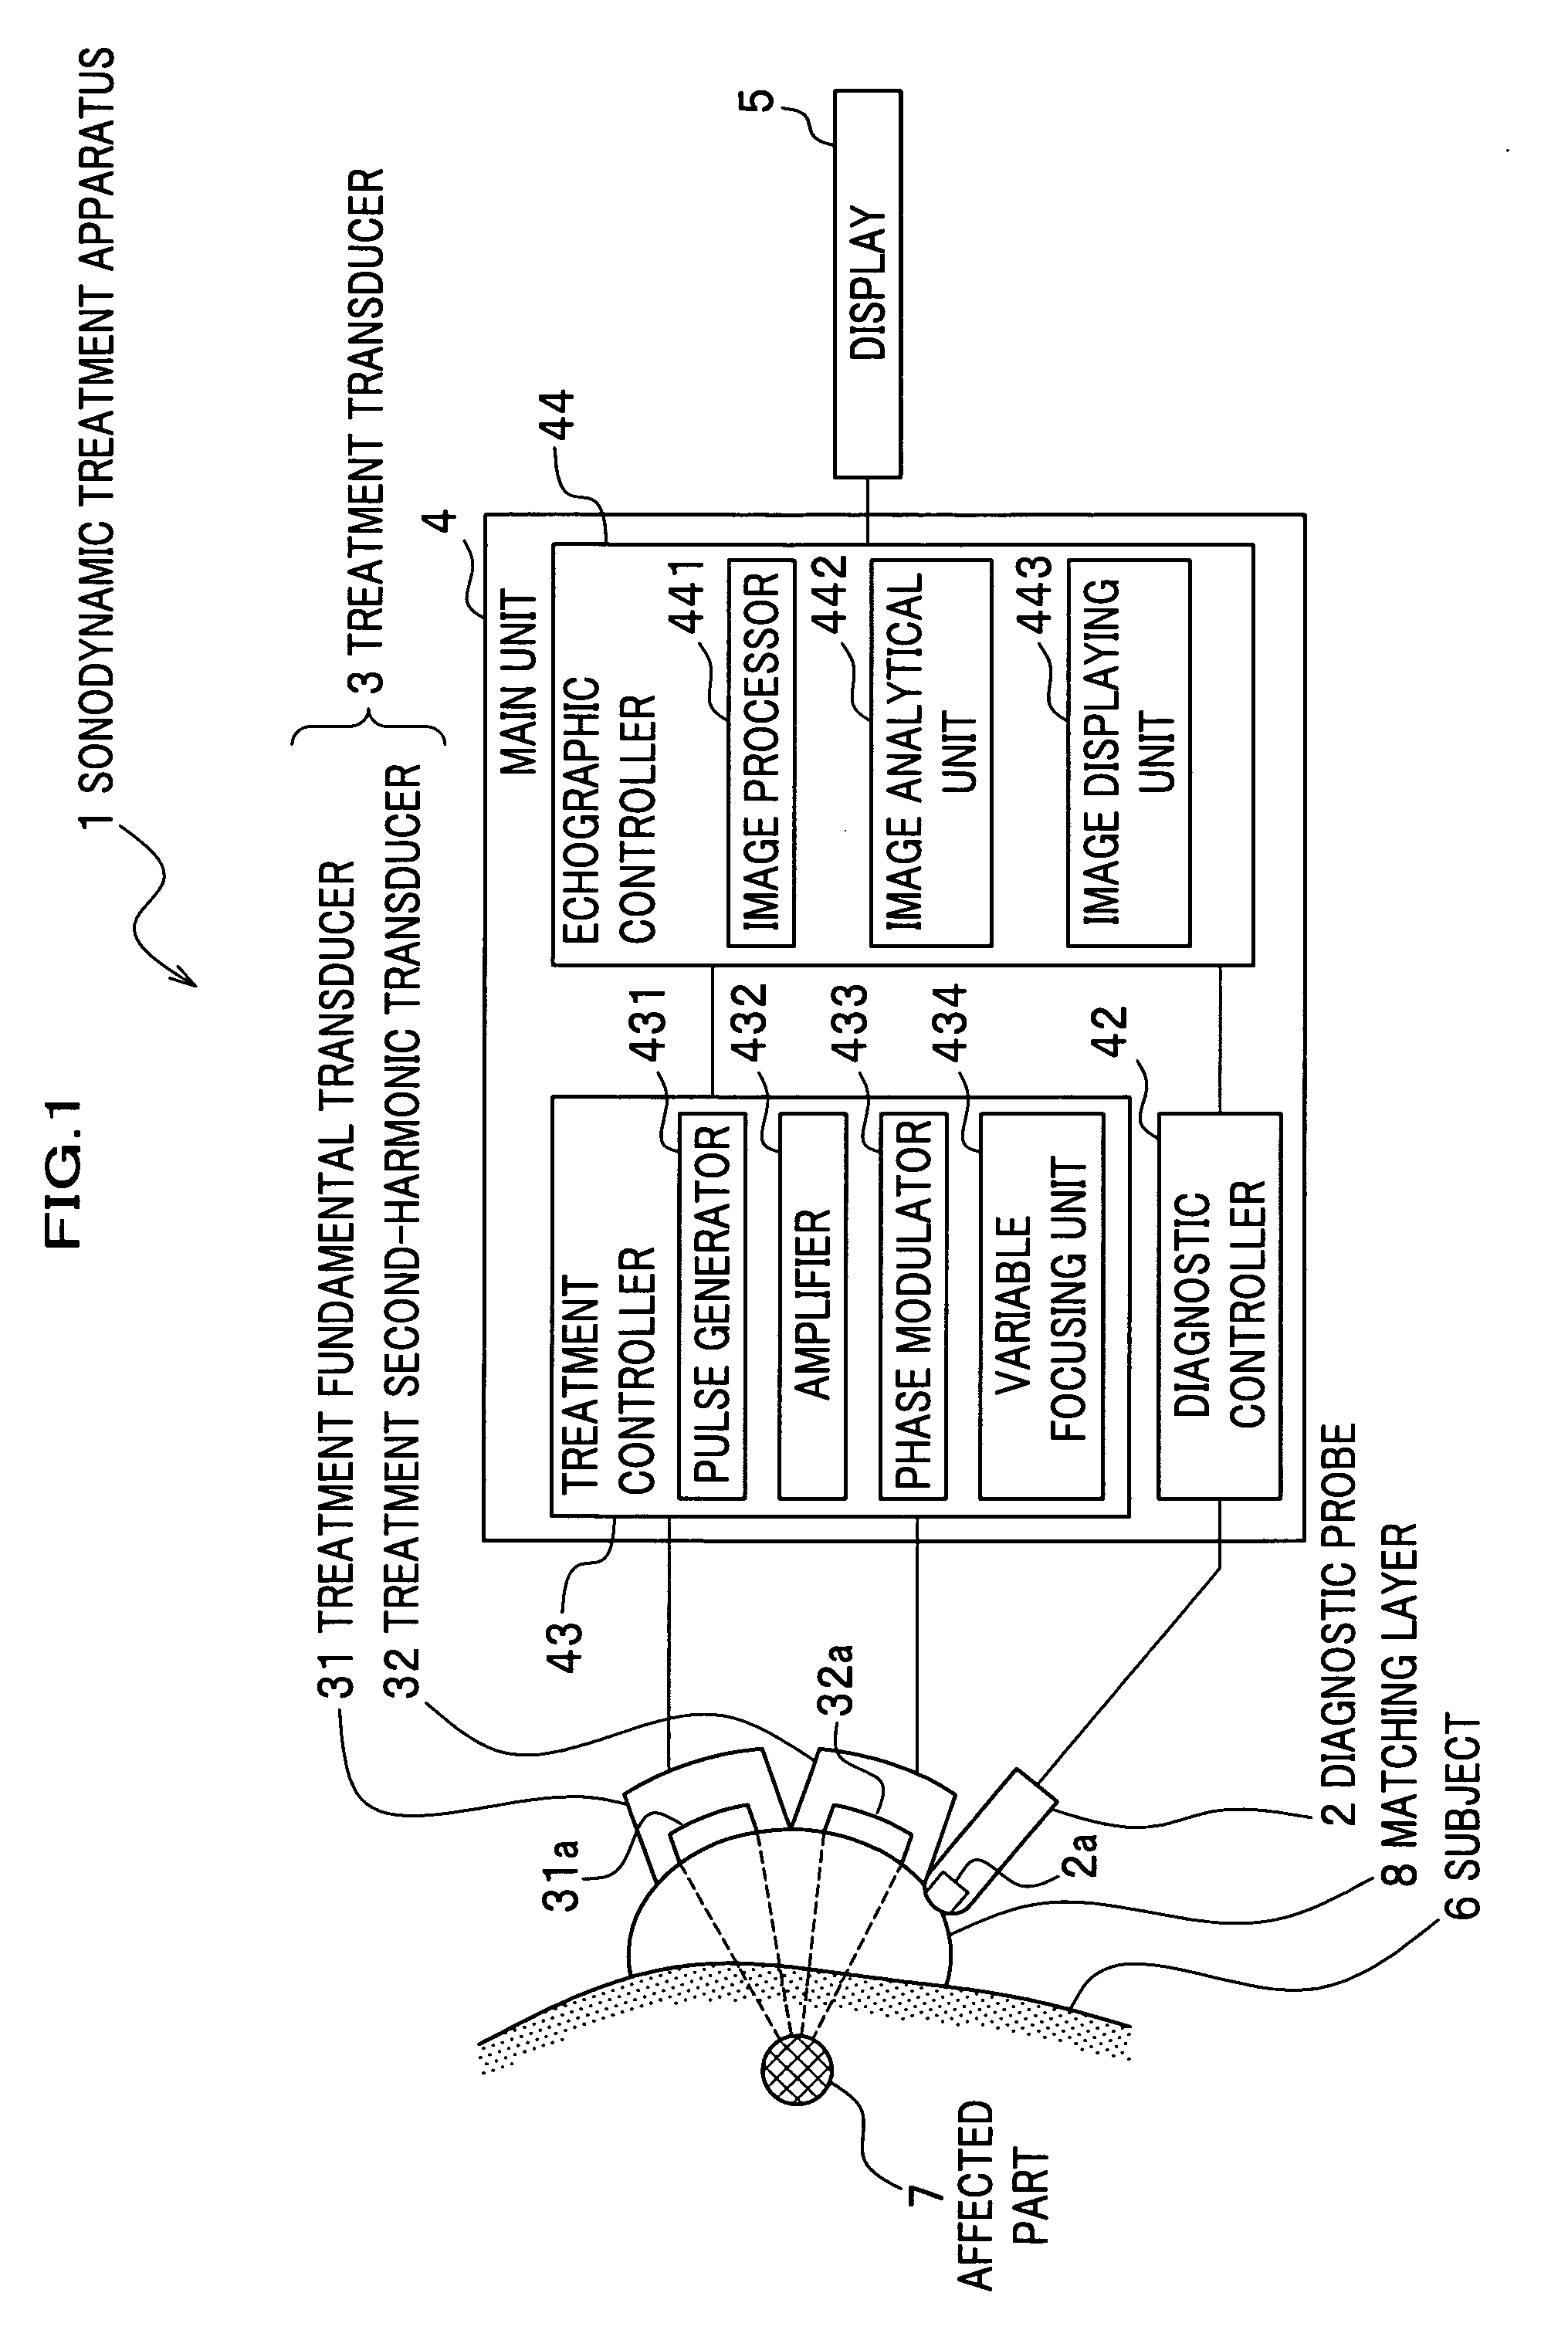 Sonodynamic treatment apparatus and method of controlling the same